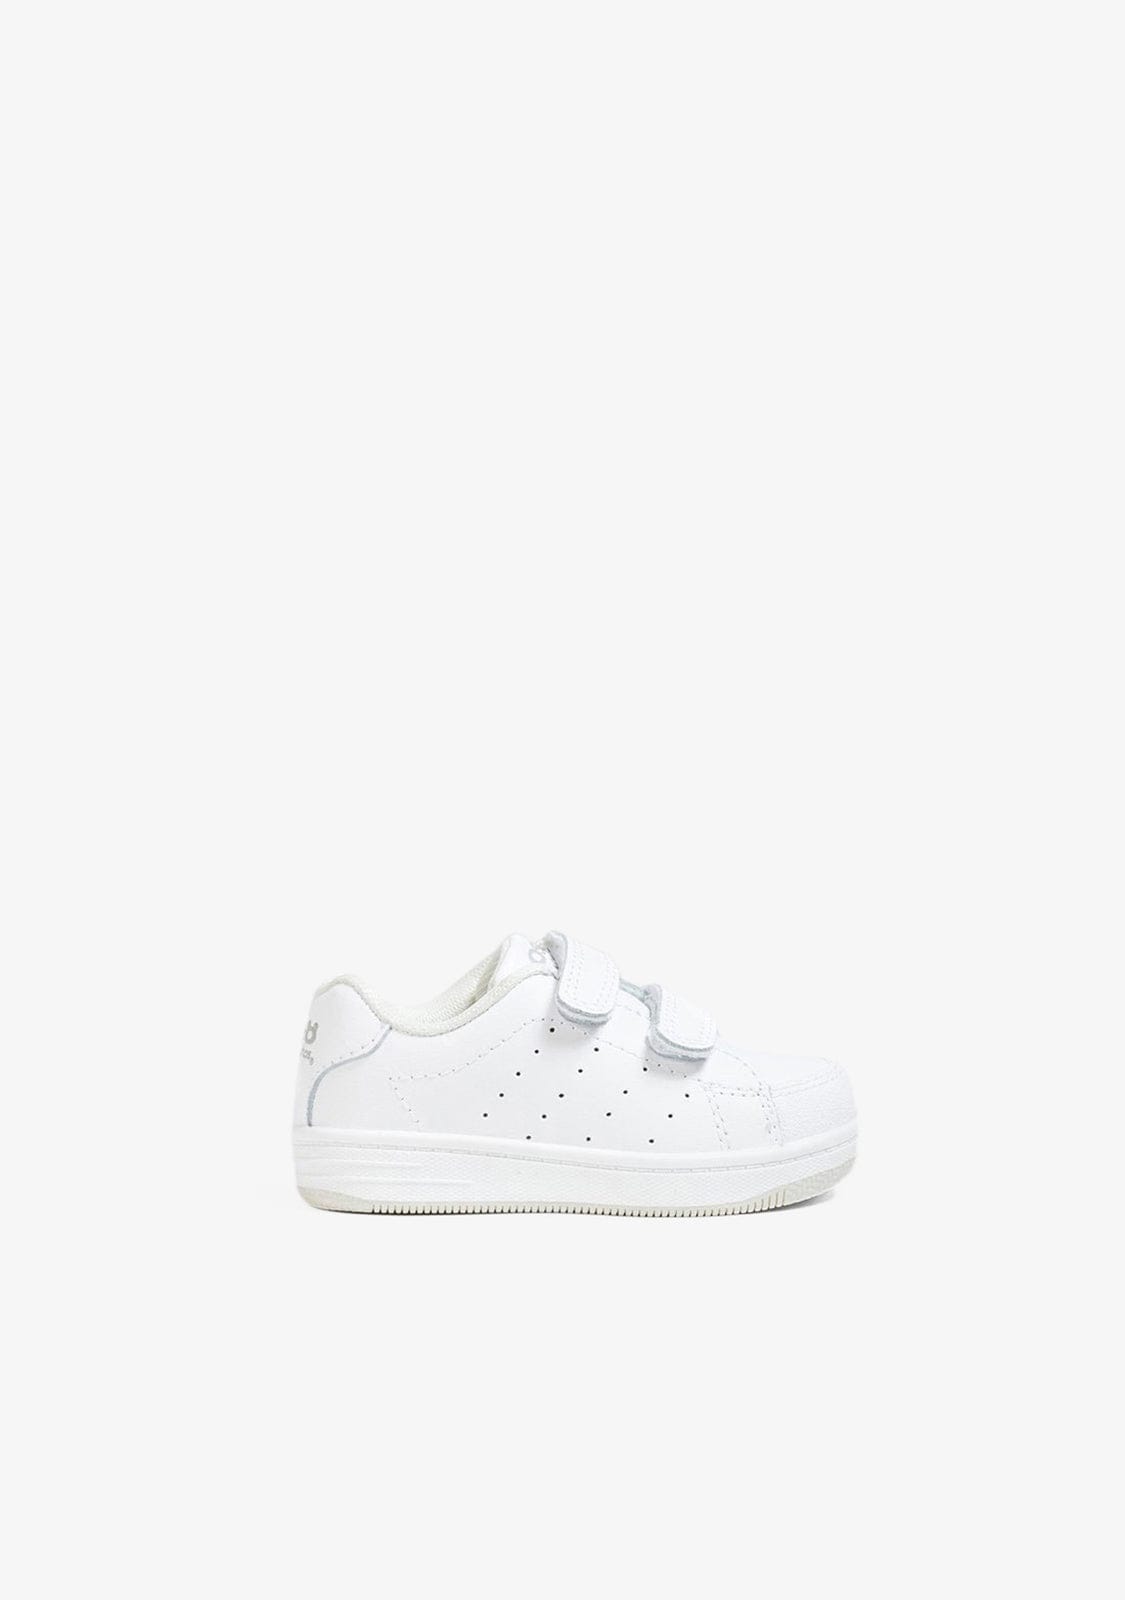 OSITO Shoes Babies White Washable Leather Trainers